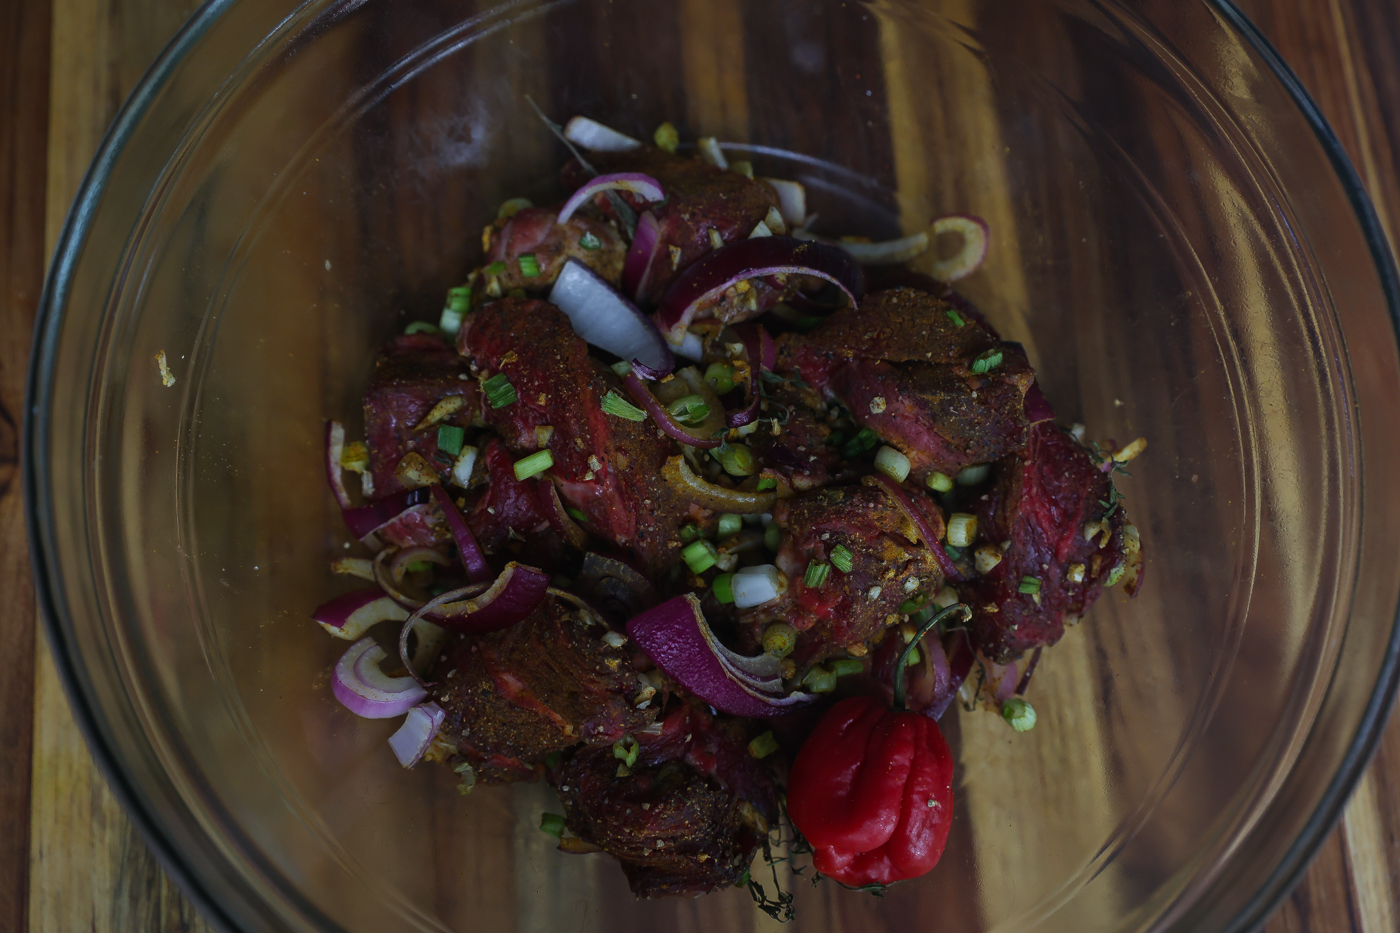 raw beef marinating in a clear glass bowl